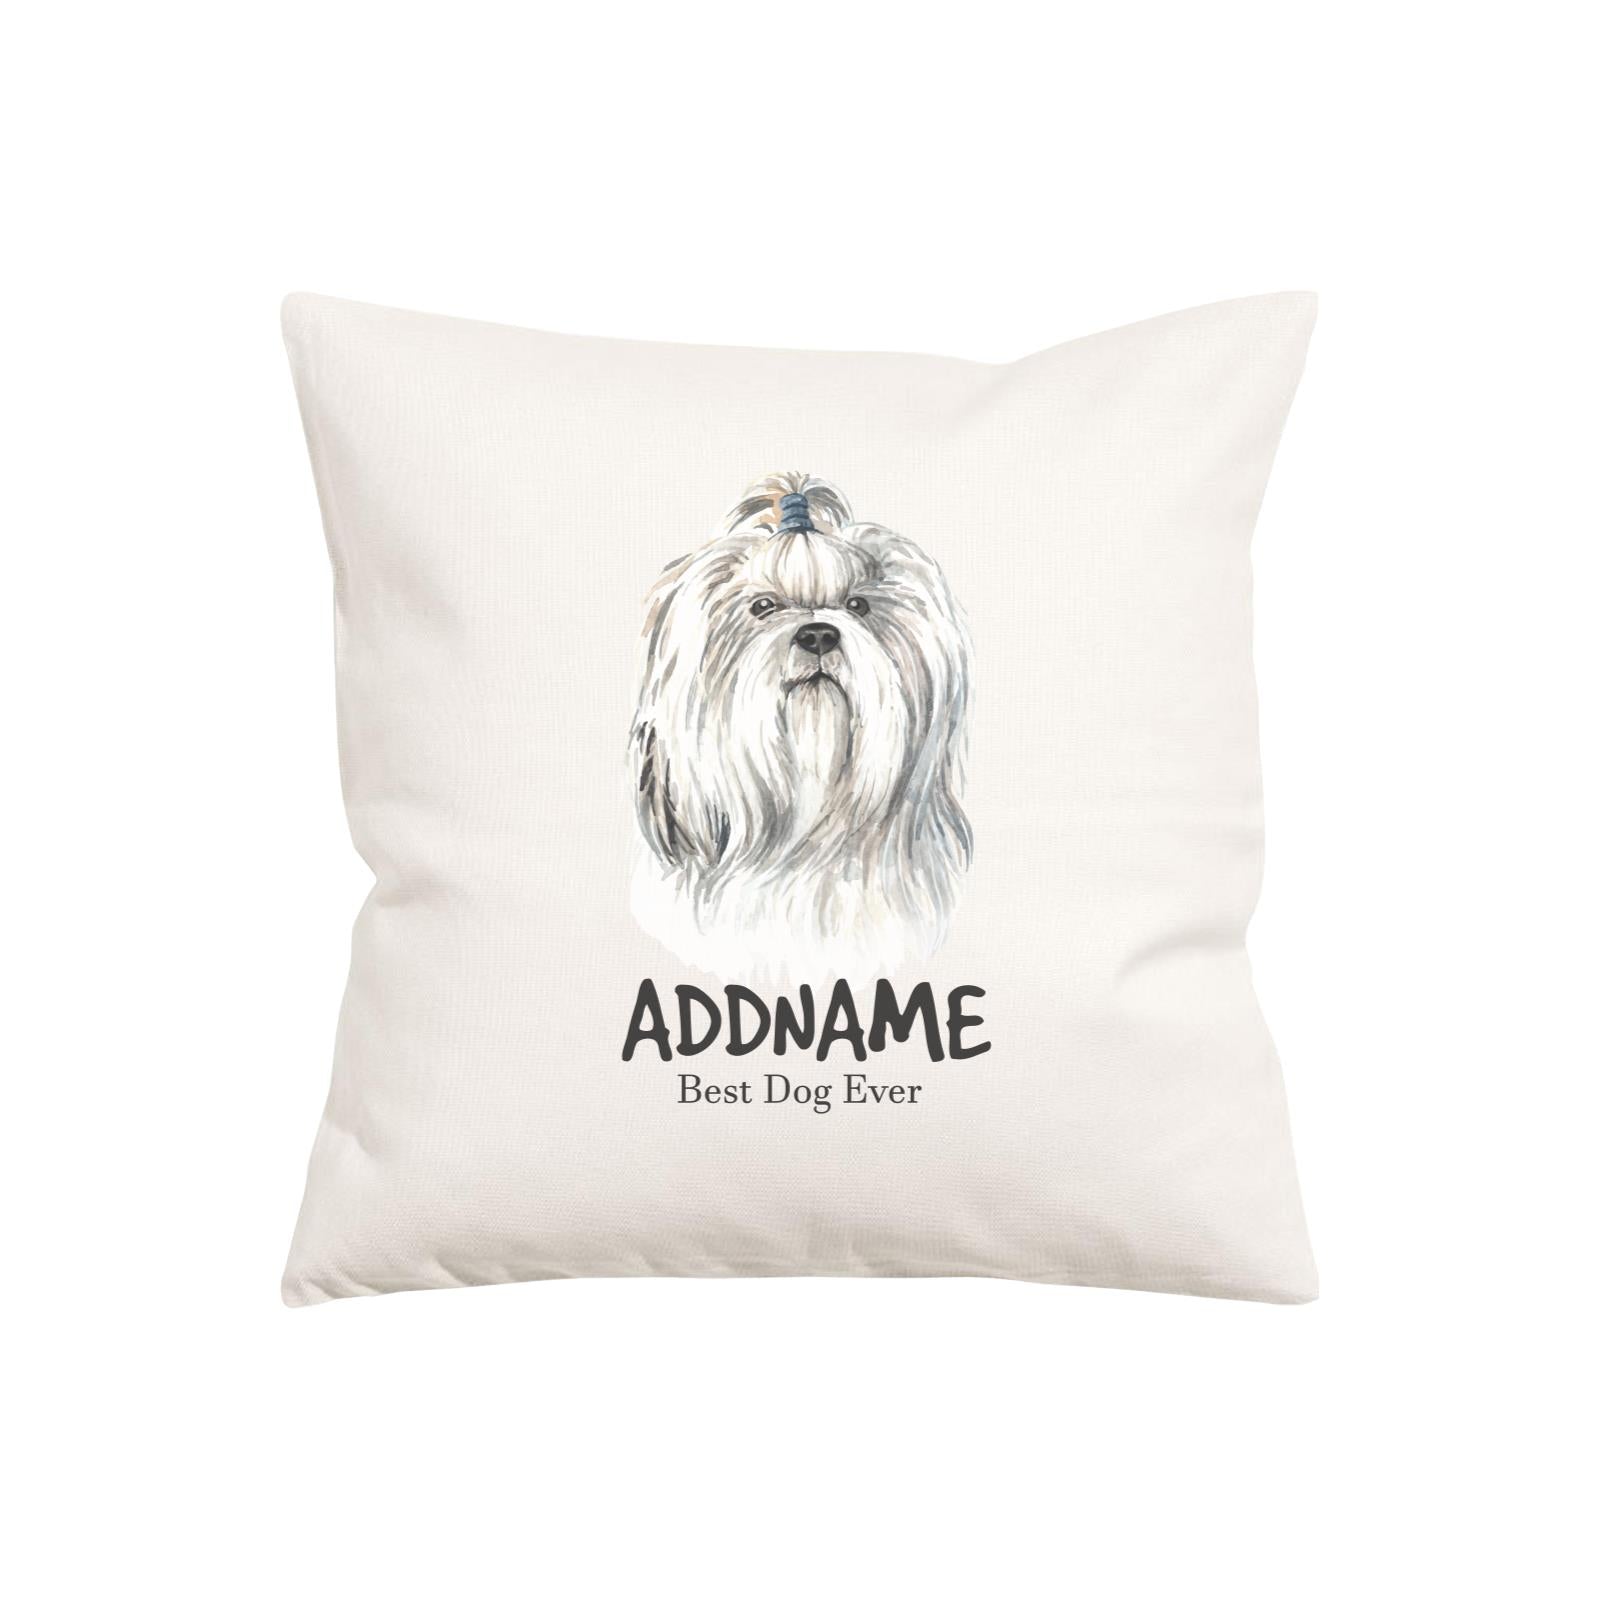 Watercolor Dog Series Shih Tzu Best Dog Ever Addname Pillow Cushion